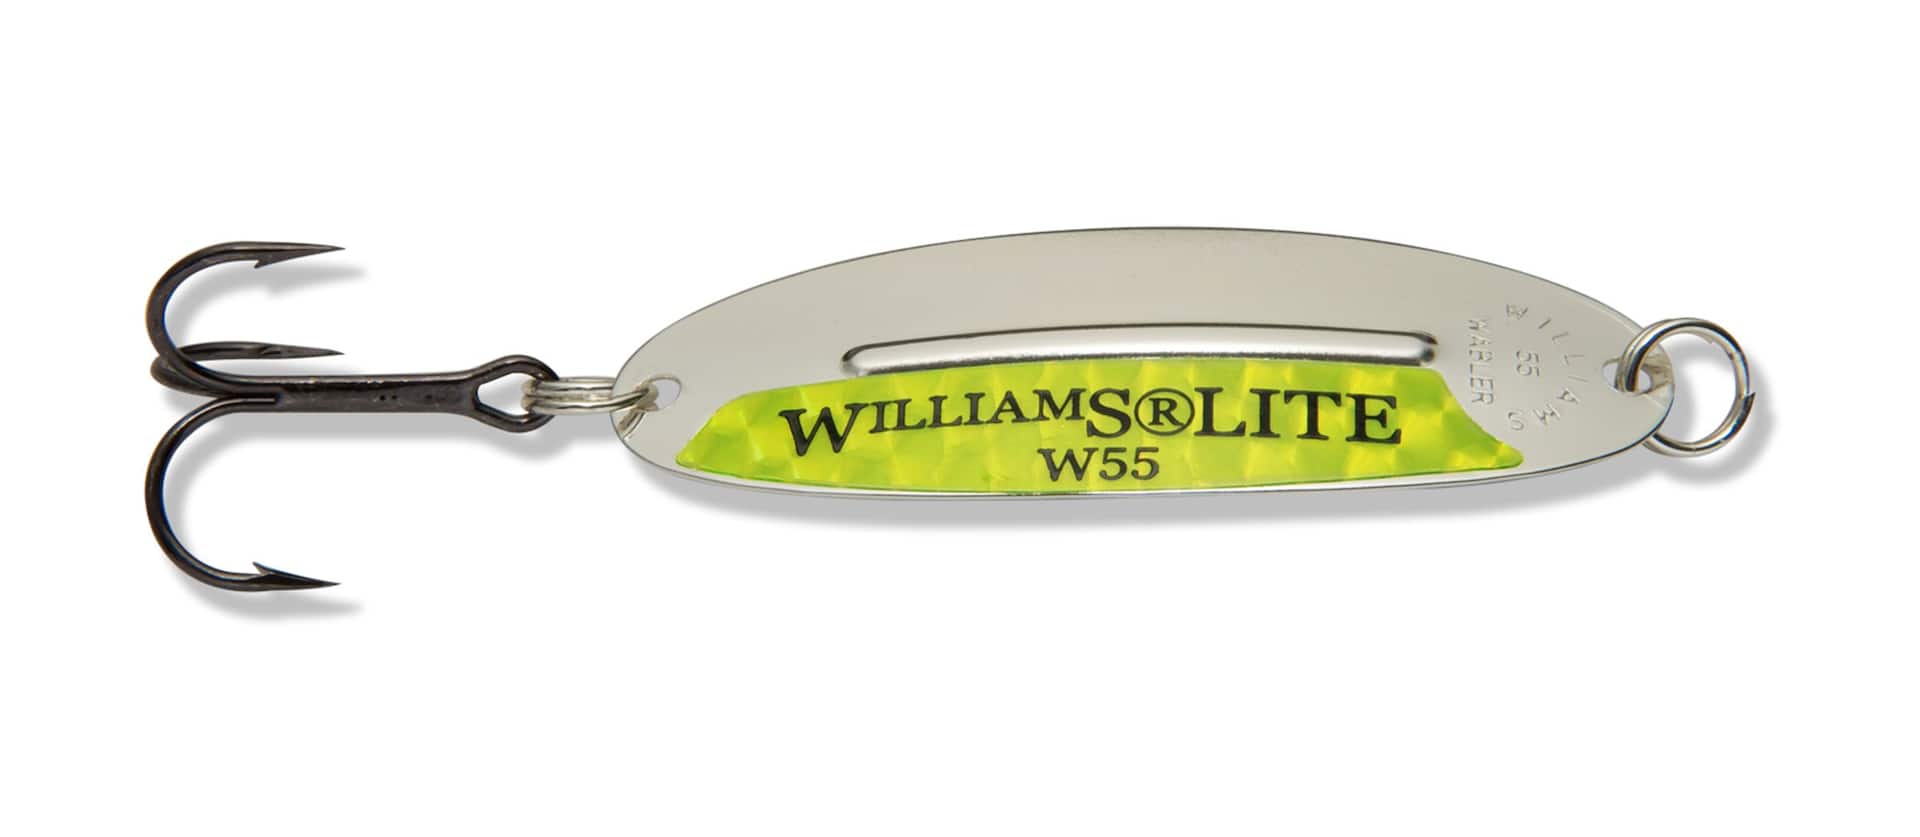 Williams W55 Wabler Fishing Lure, 1/4-oz, Light Chartreuse